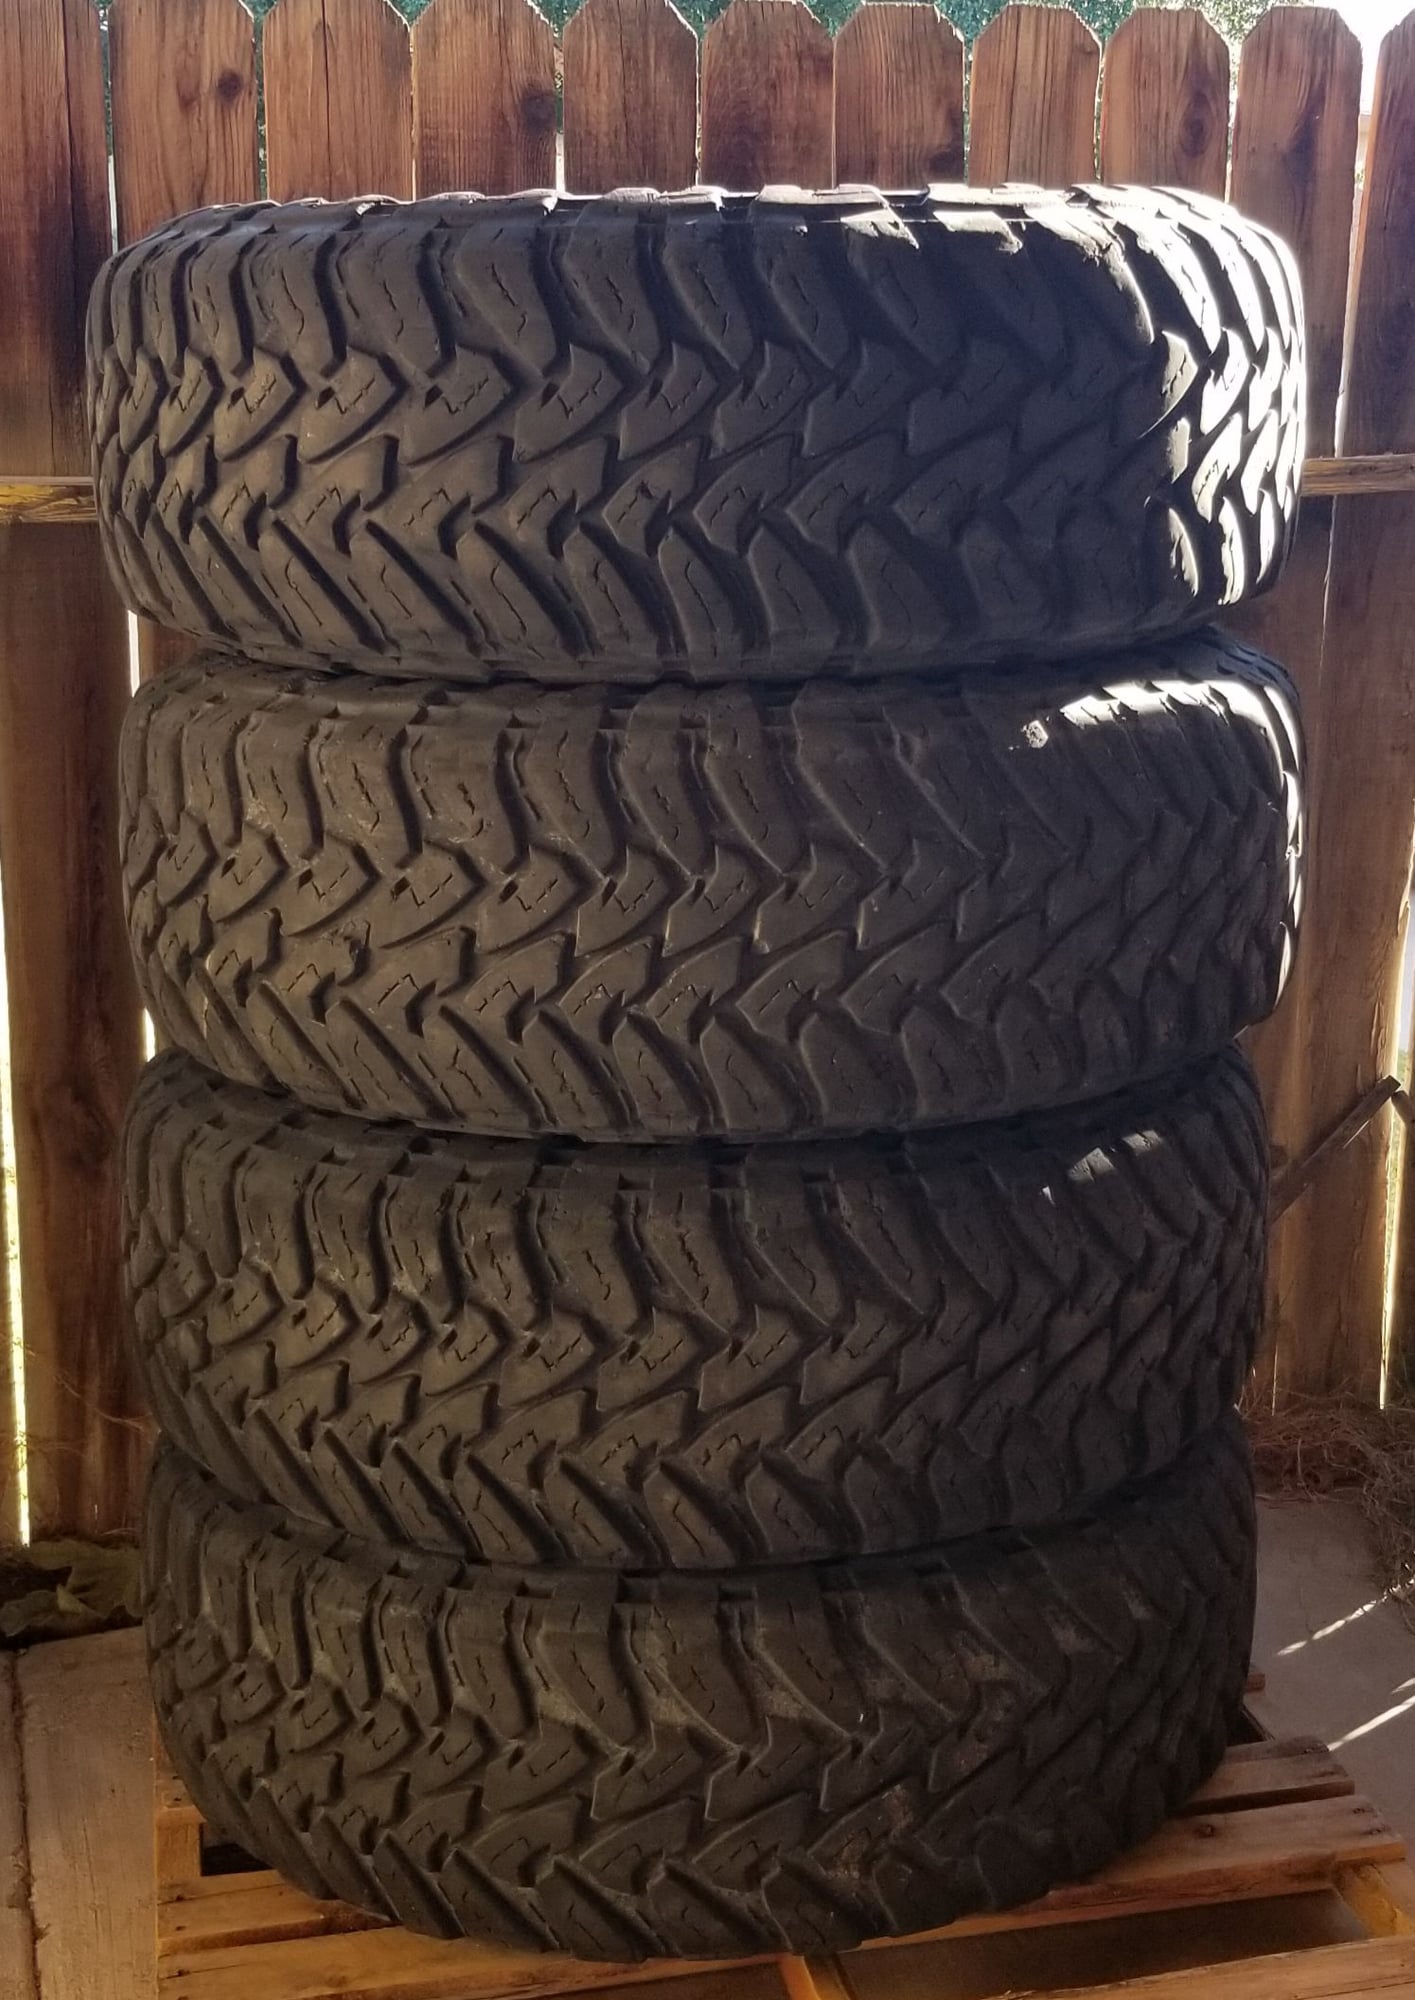 Wheels and Tires/Axles - 40" Toyos for sale "used" - Used - 0  All Models - Indio, CA 92201, United States